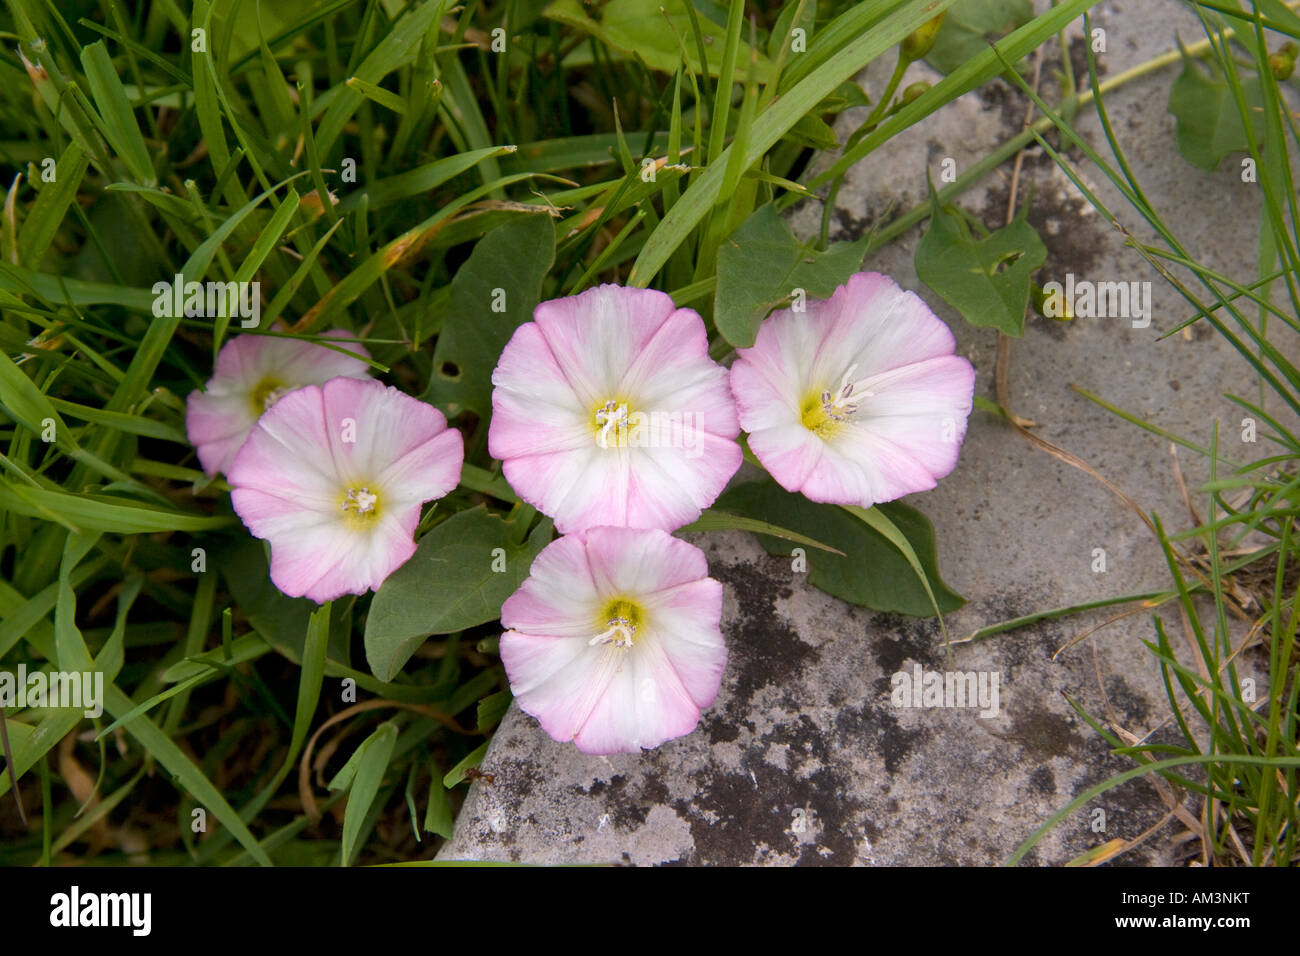 Close up of variagated Convolvulus arvensis Field Bindweed creeping jenny flowers against greenery and lichen covered stone Stock Photo